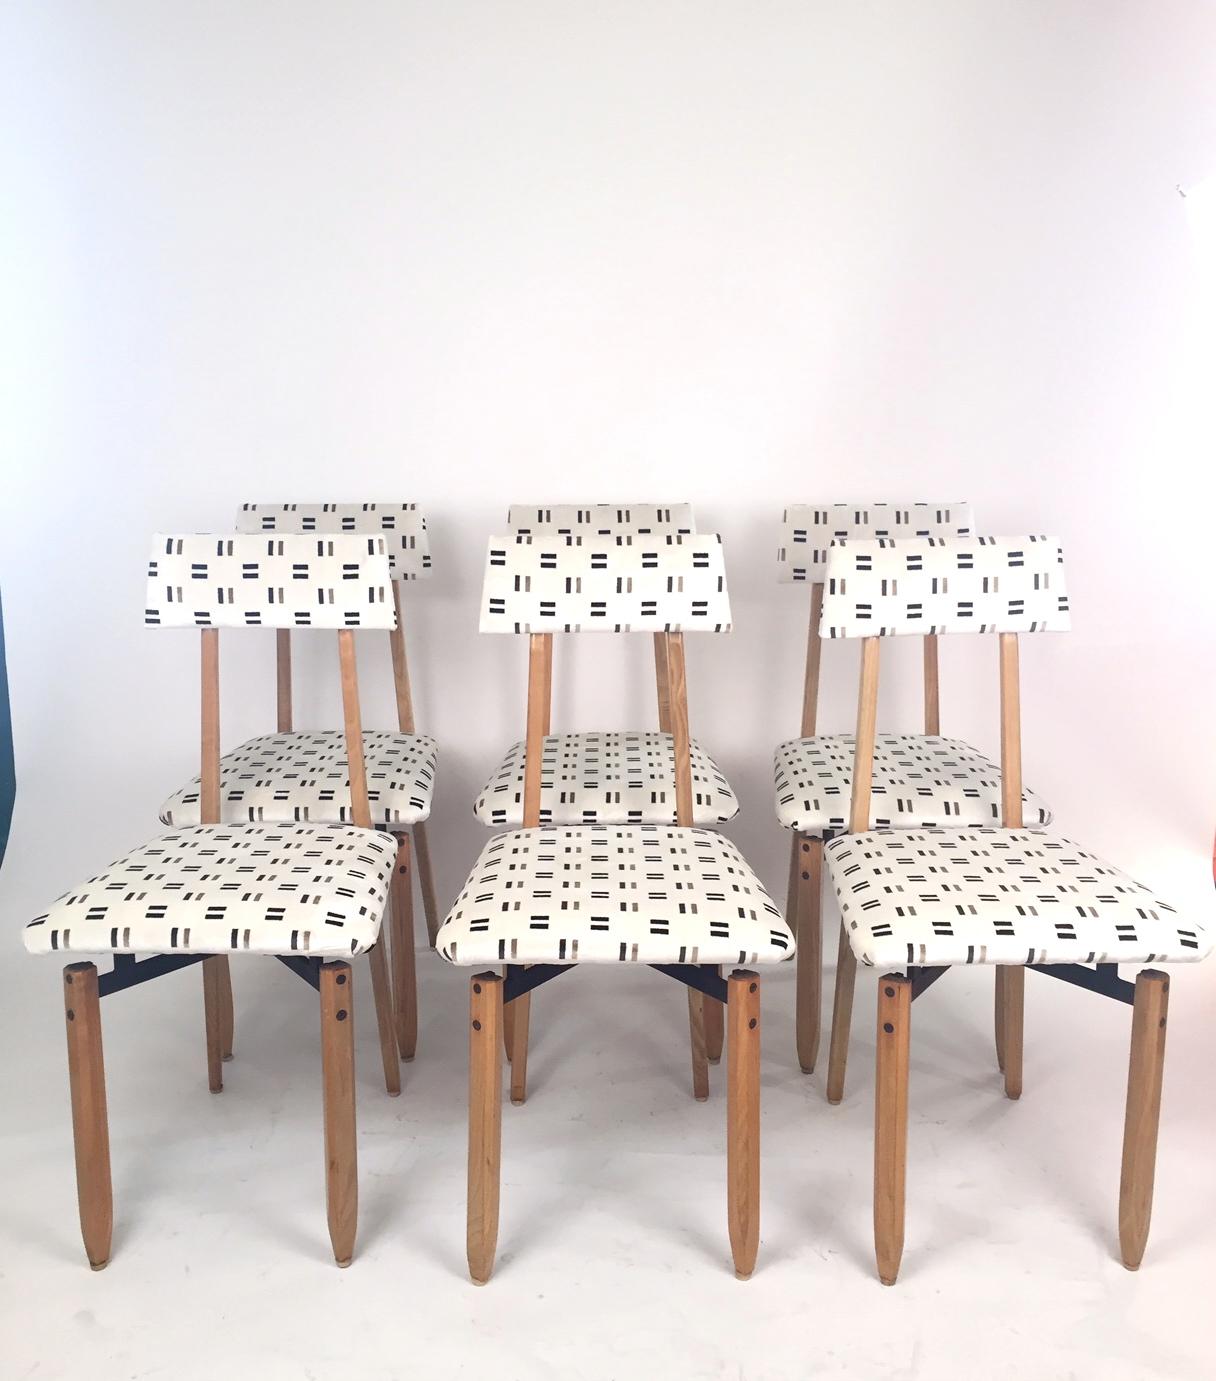 A set of Roberto Aloi Mid-Century Italian set of six chairs . Ash wood , reupholstered velvet seats and back and enameled metal.Excellent condition.